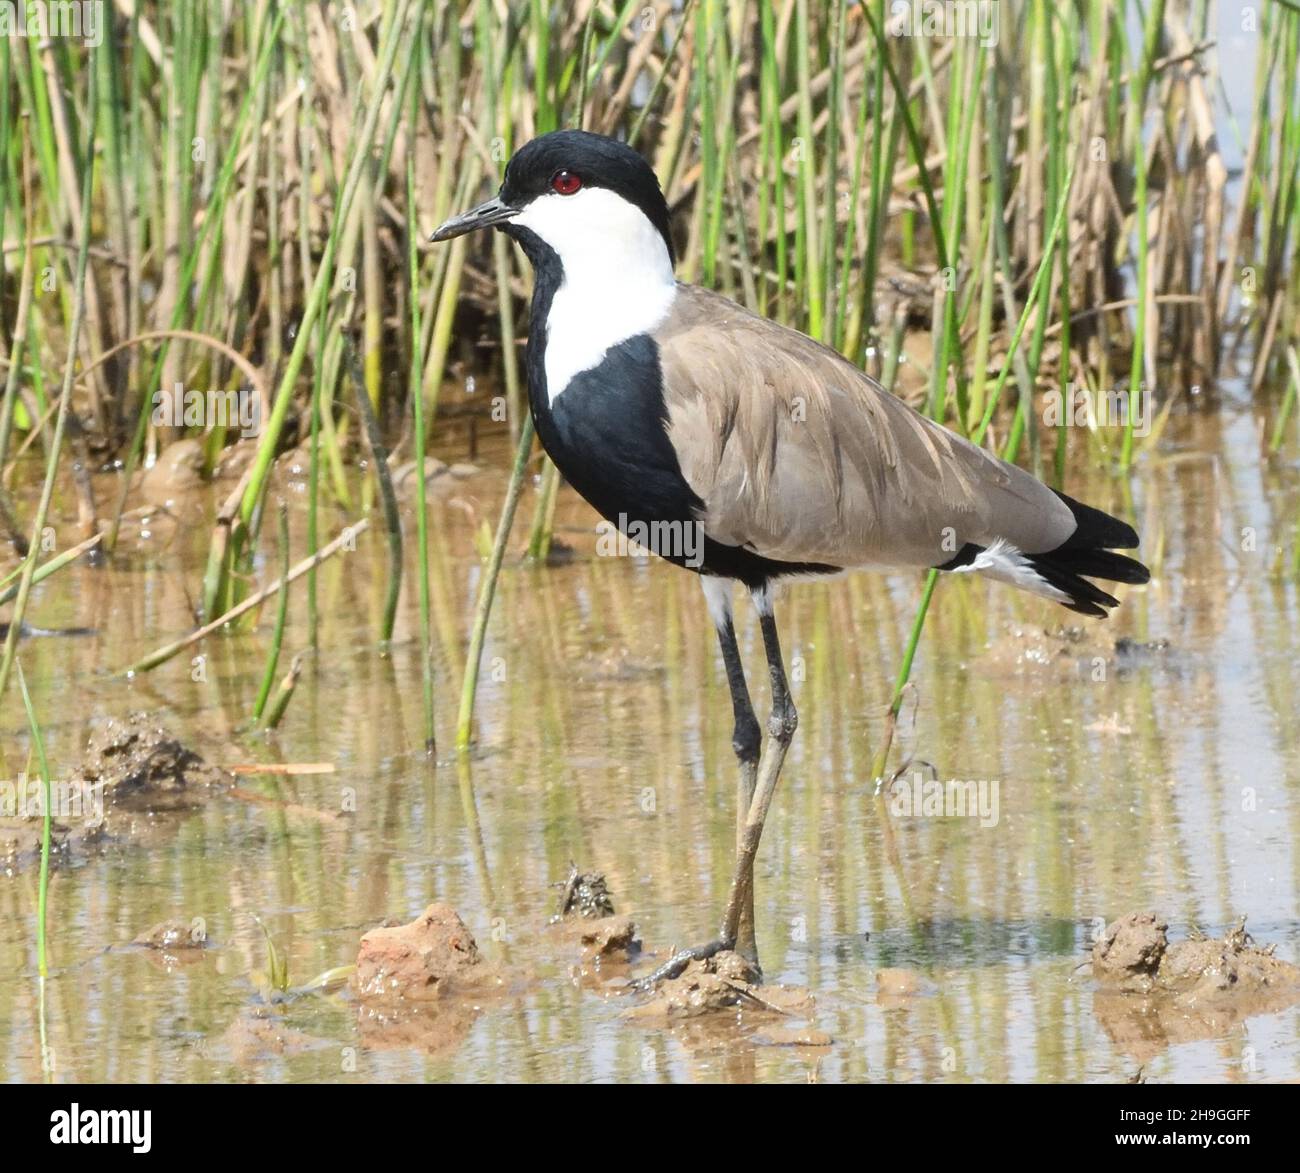 A spur-winged lapwing (Vanellus spinosus) wades through a muddy pool.  Njau, The Republic of the Gambia. Stock Photo